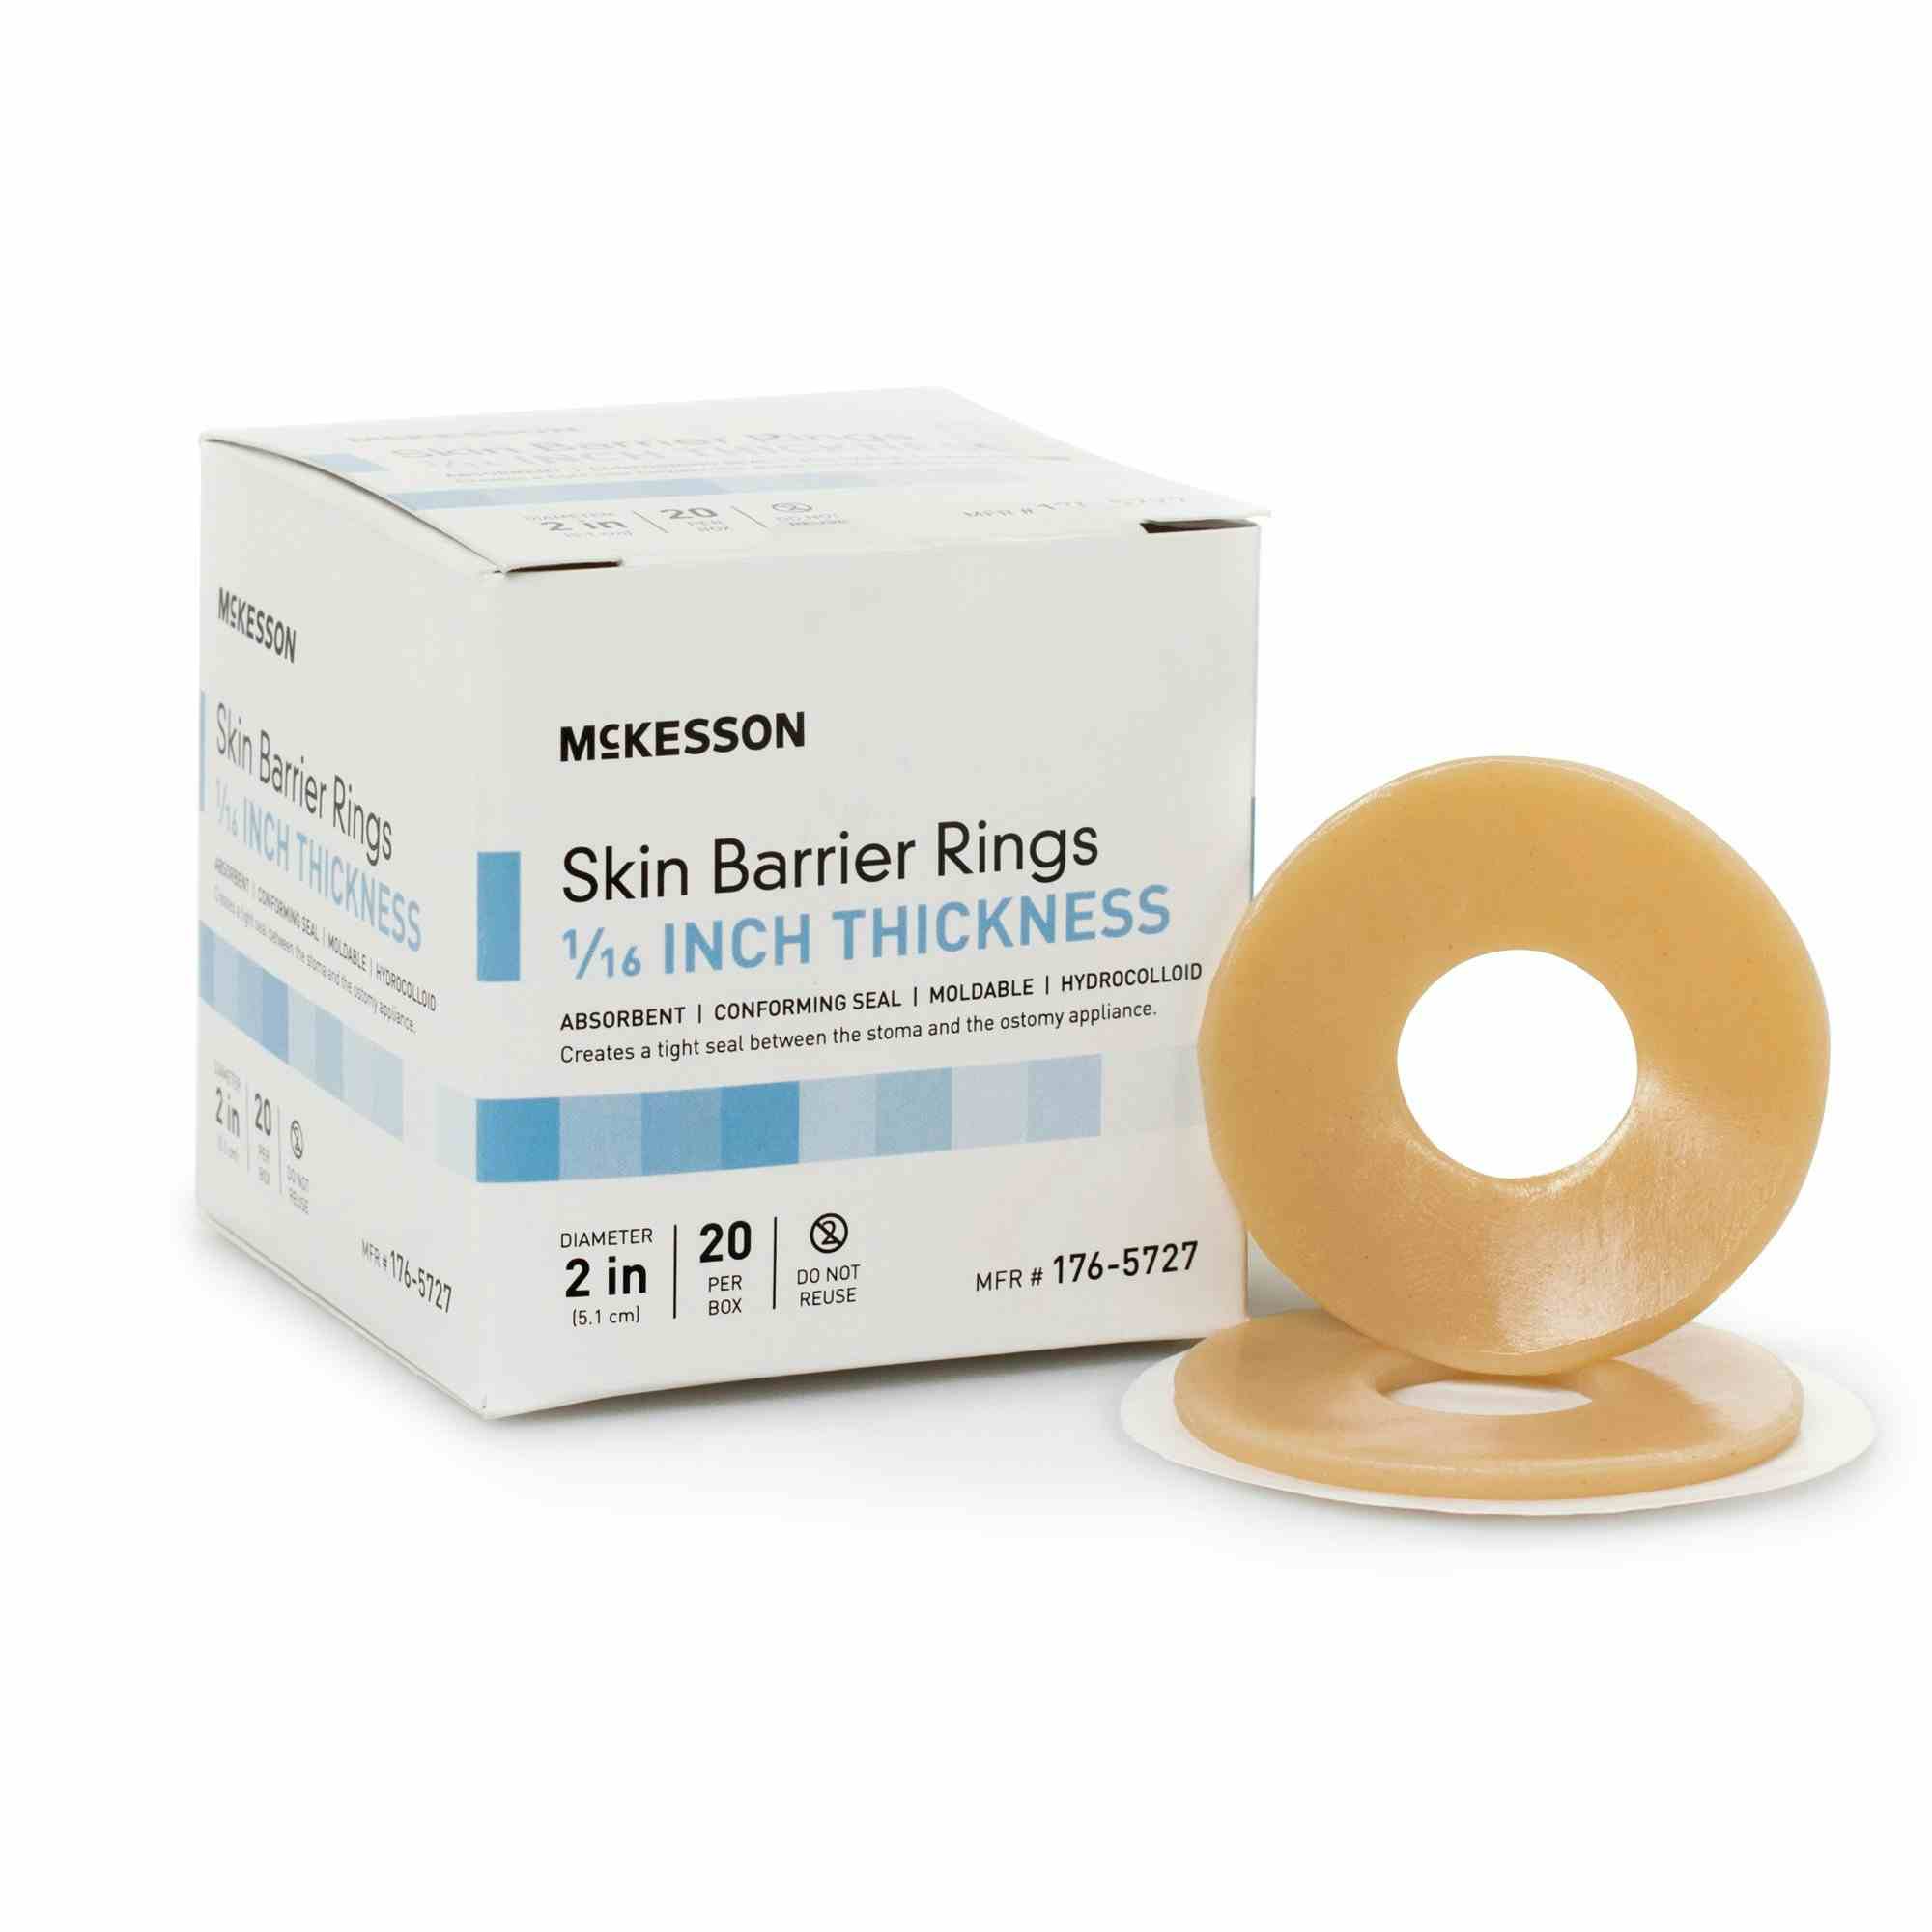 McKesson Skin Barrier Rings, 1/16" Thickness, 176-5727, Box of 20